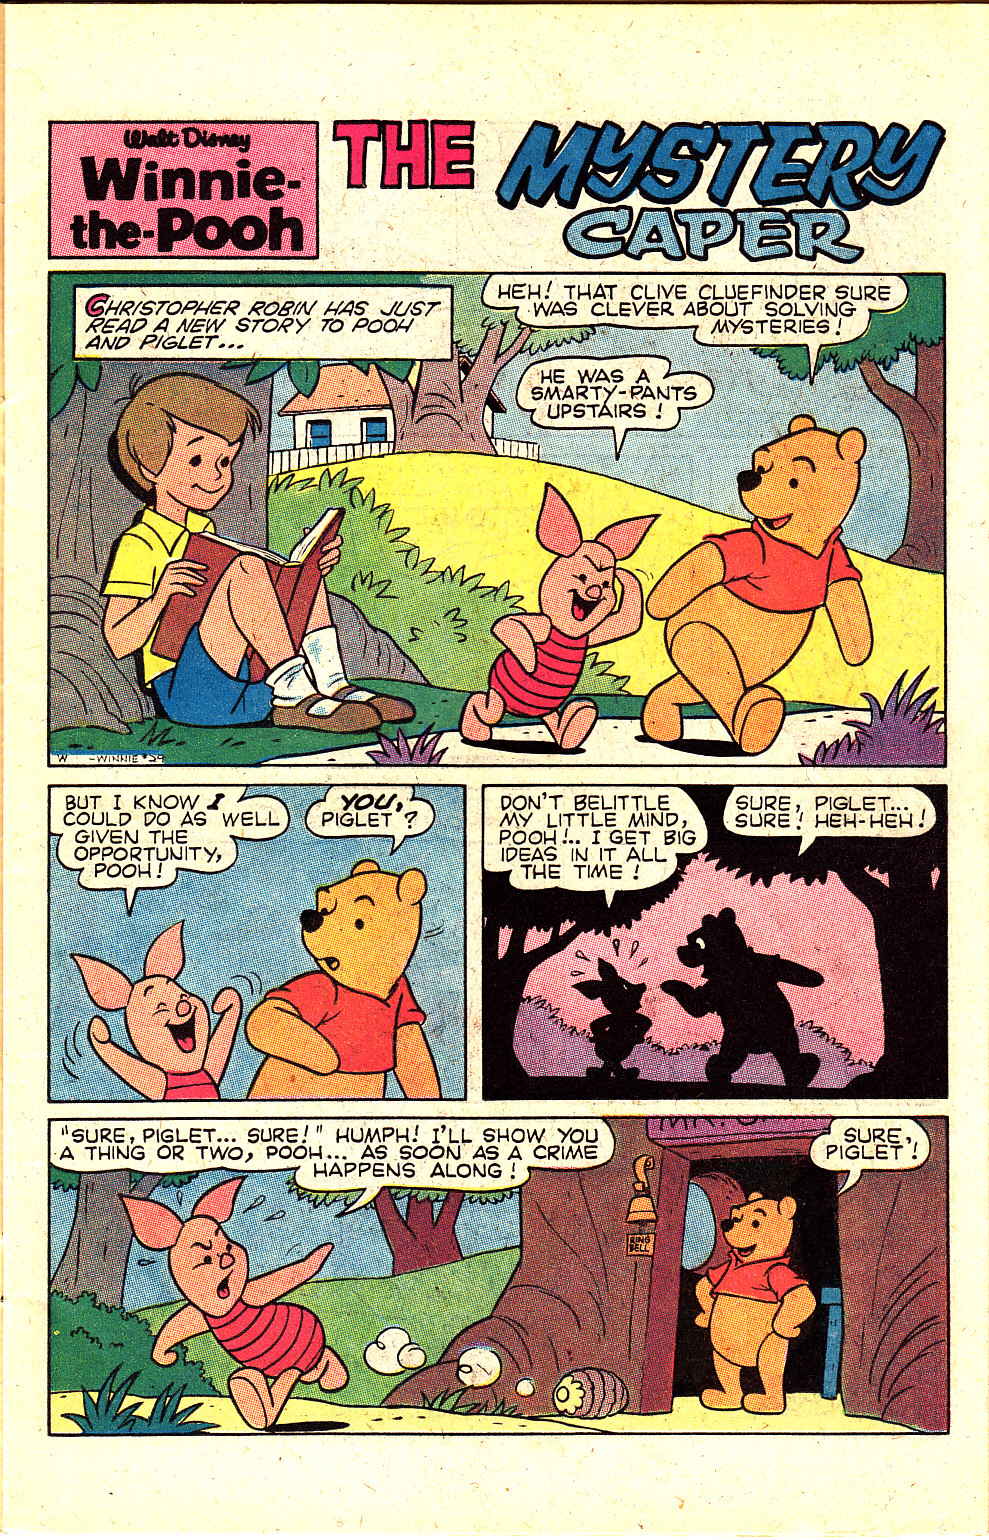 Read online Winnie-the-Pooh comic -  Issue #29 - 11